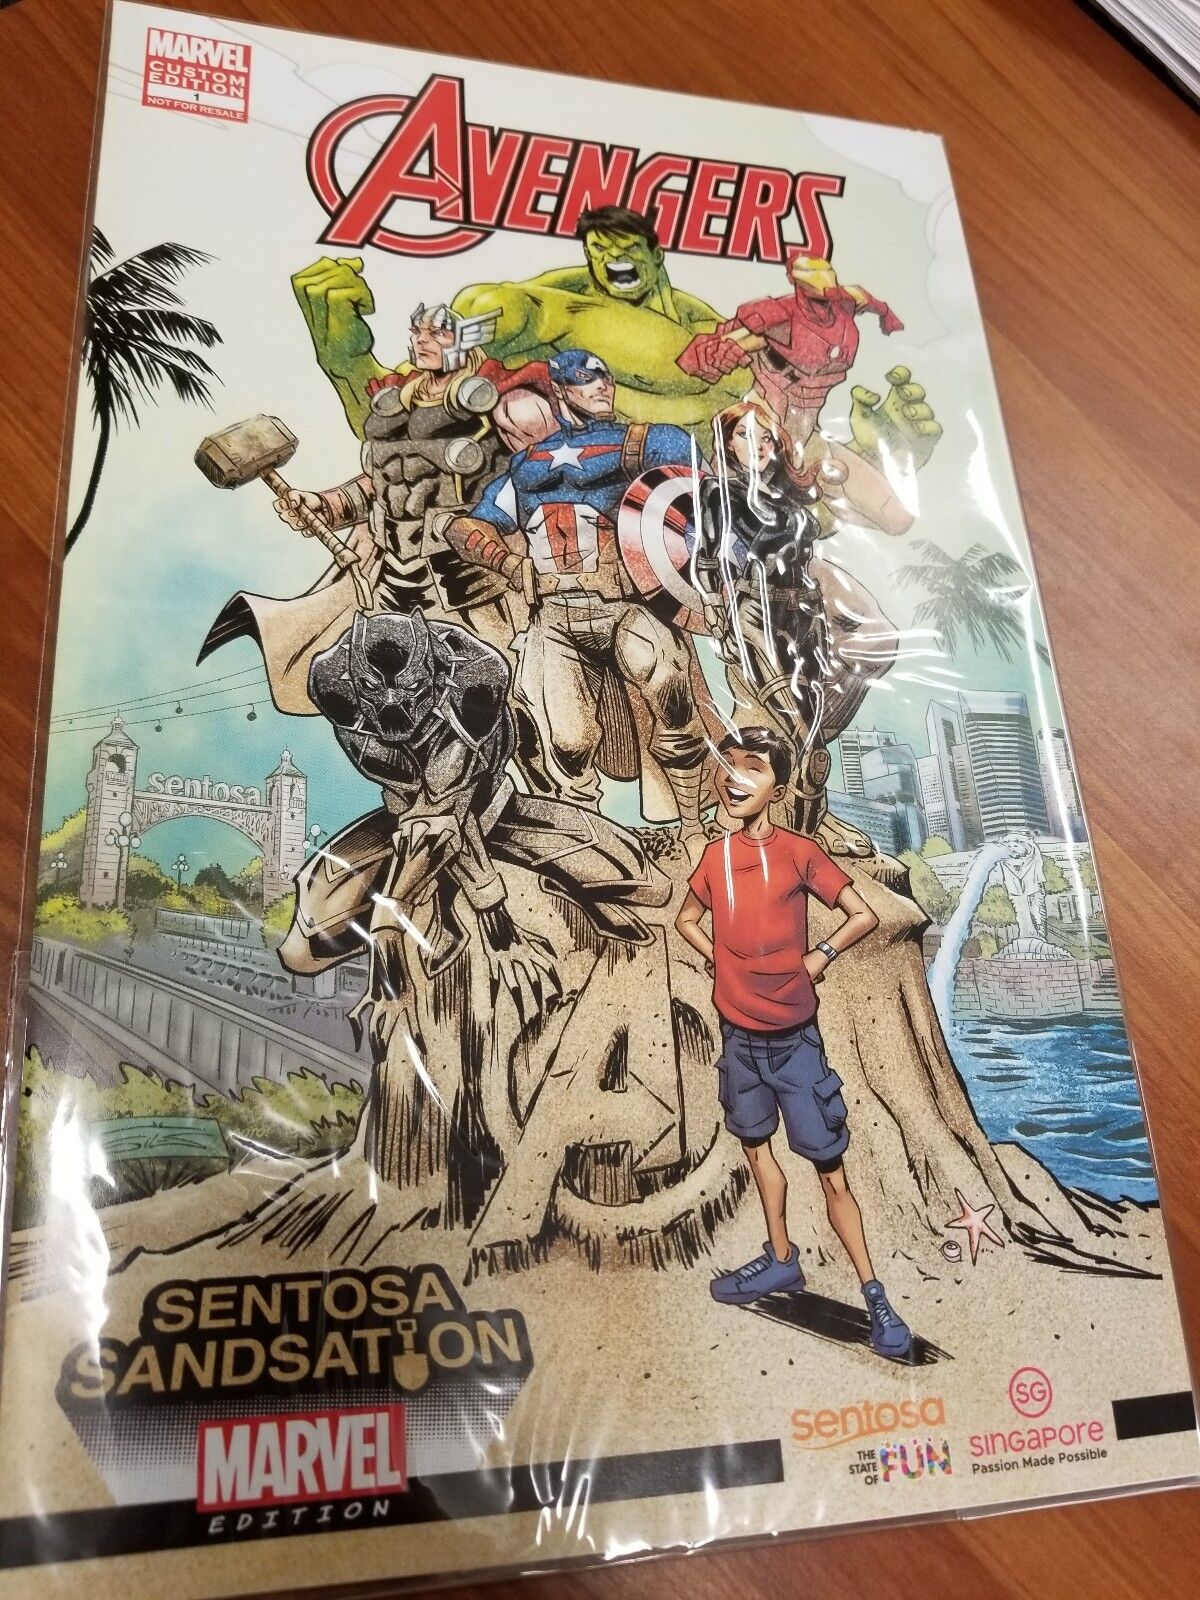 Marvel Avengers Sentosa Sandsation Comic Book INCREDIBLY RARE from Singapore